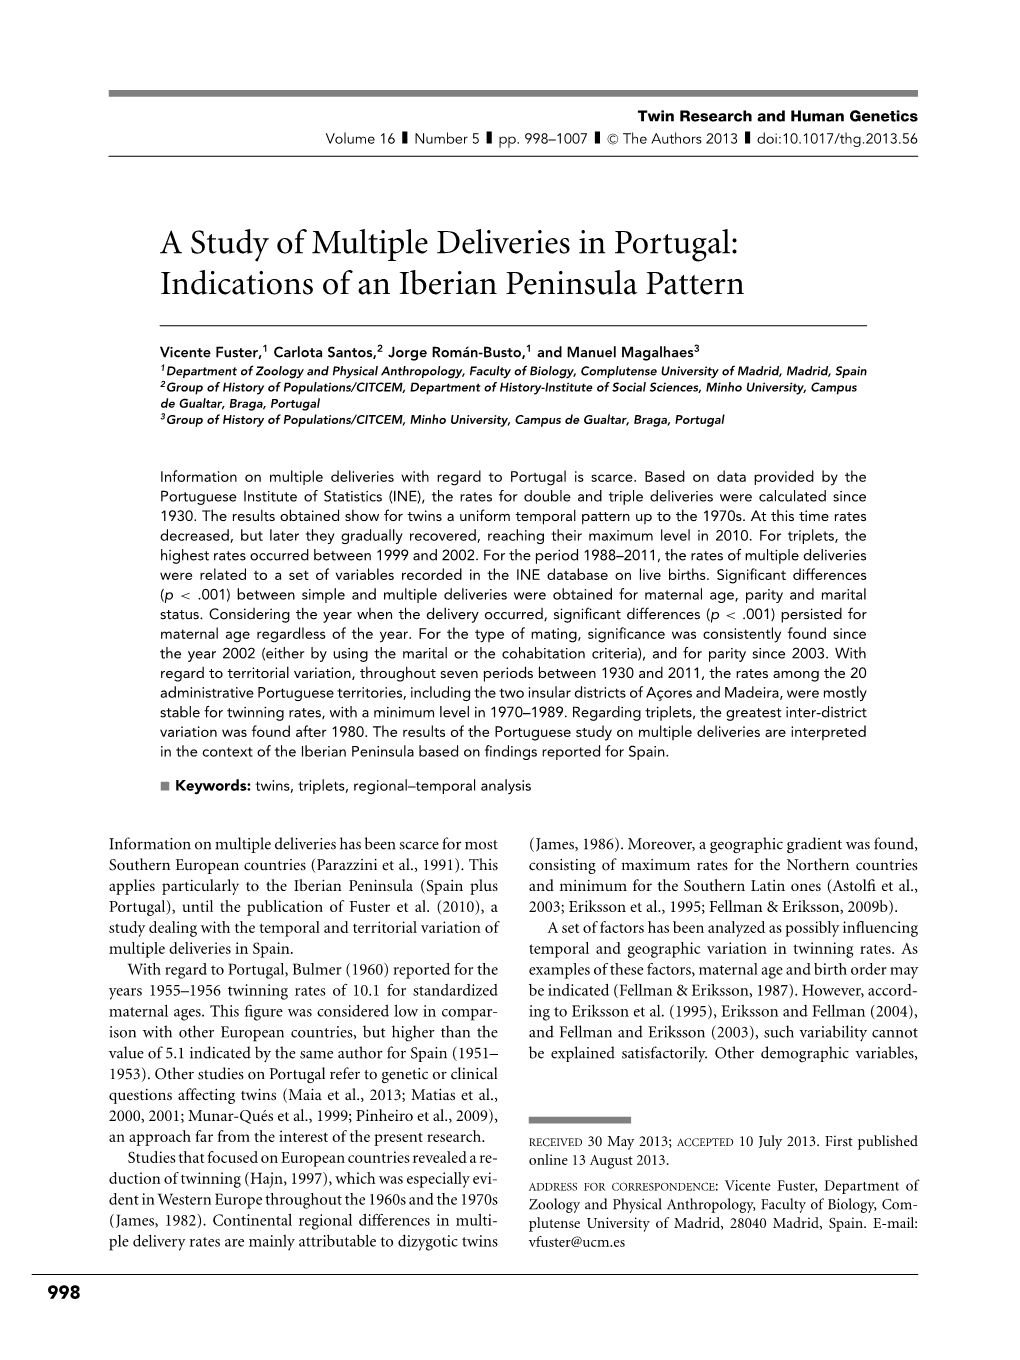 A Study of Multiple Deliveries in Portugal: Indications of an Iberian Peninsula Pattern